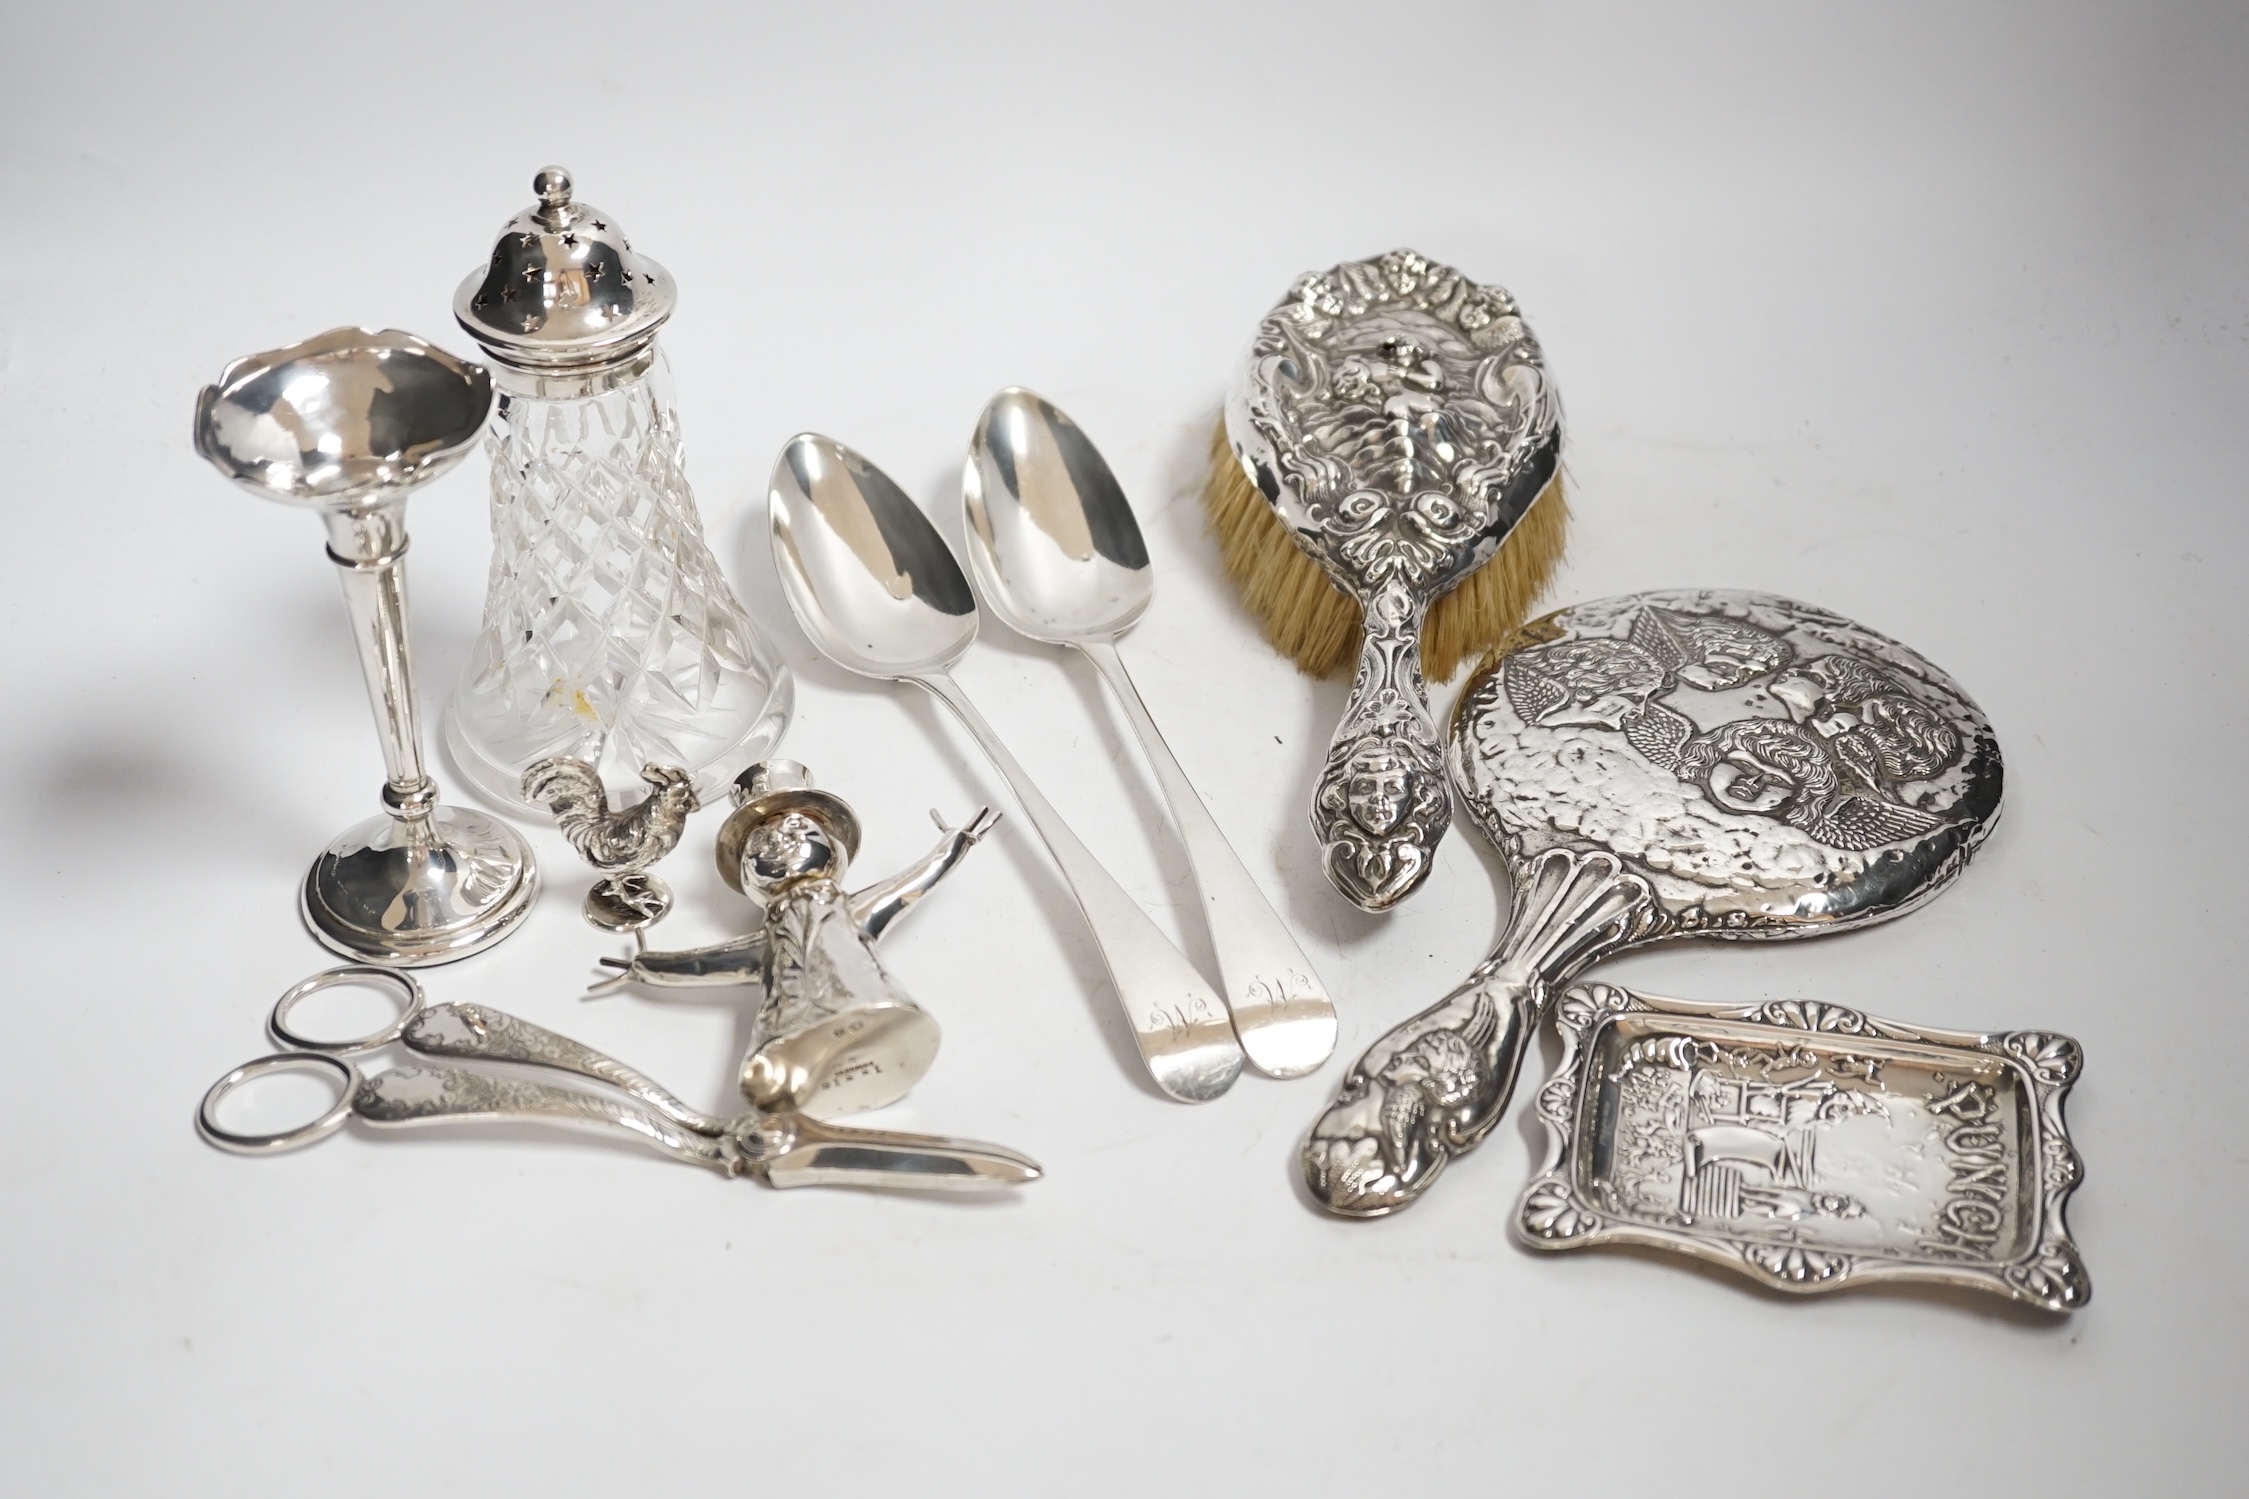 Sundry silver including a pair of George III silver Old English pattern table spoons, by Peter & William Bateman, a novelty silver ring-holder modelled as a scarecrow, a pair of grape shears, cockerel seal, small Mr. Pun